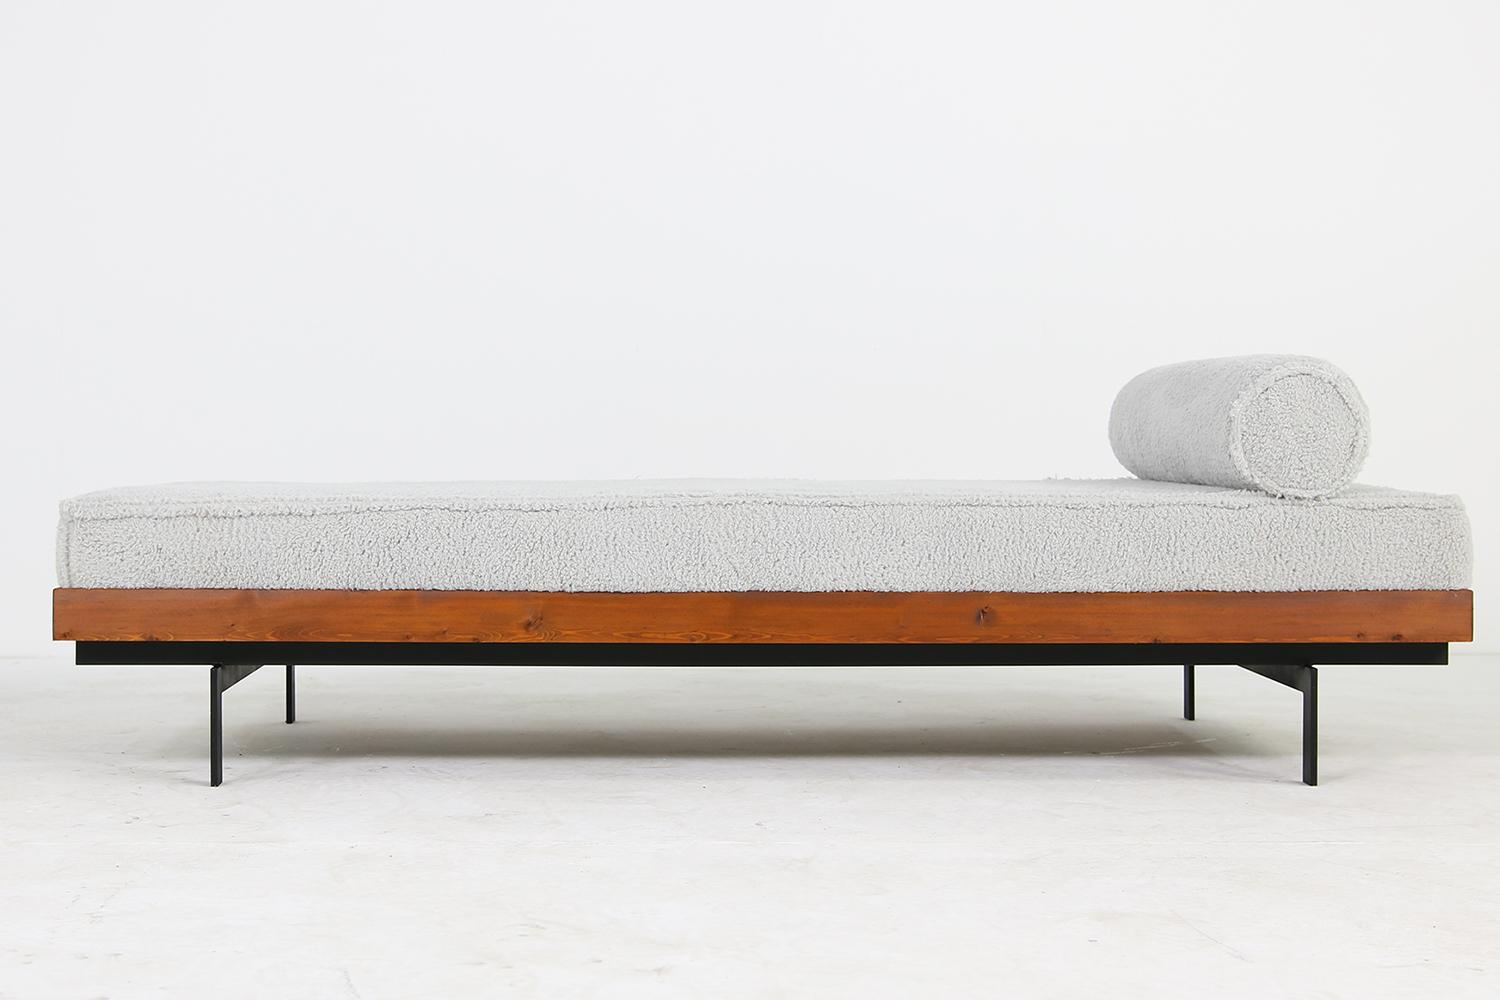 Beautiful Nathan Lindberg Siberian Larch wood (larix sibirica) daybed, teak vintage stained, all done in solid wood, steel base, minimalist design but heavy weight, high density foam mattress, covered with grey eco fur, teddy bear fabric, matching